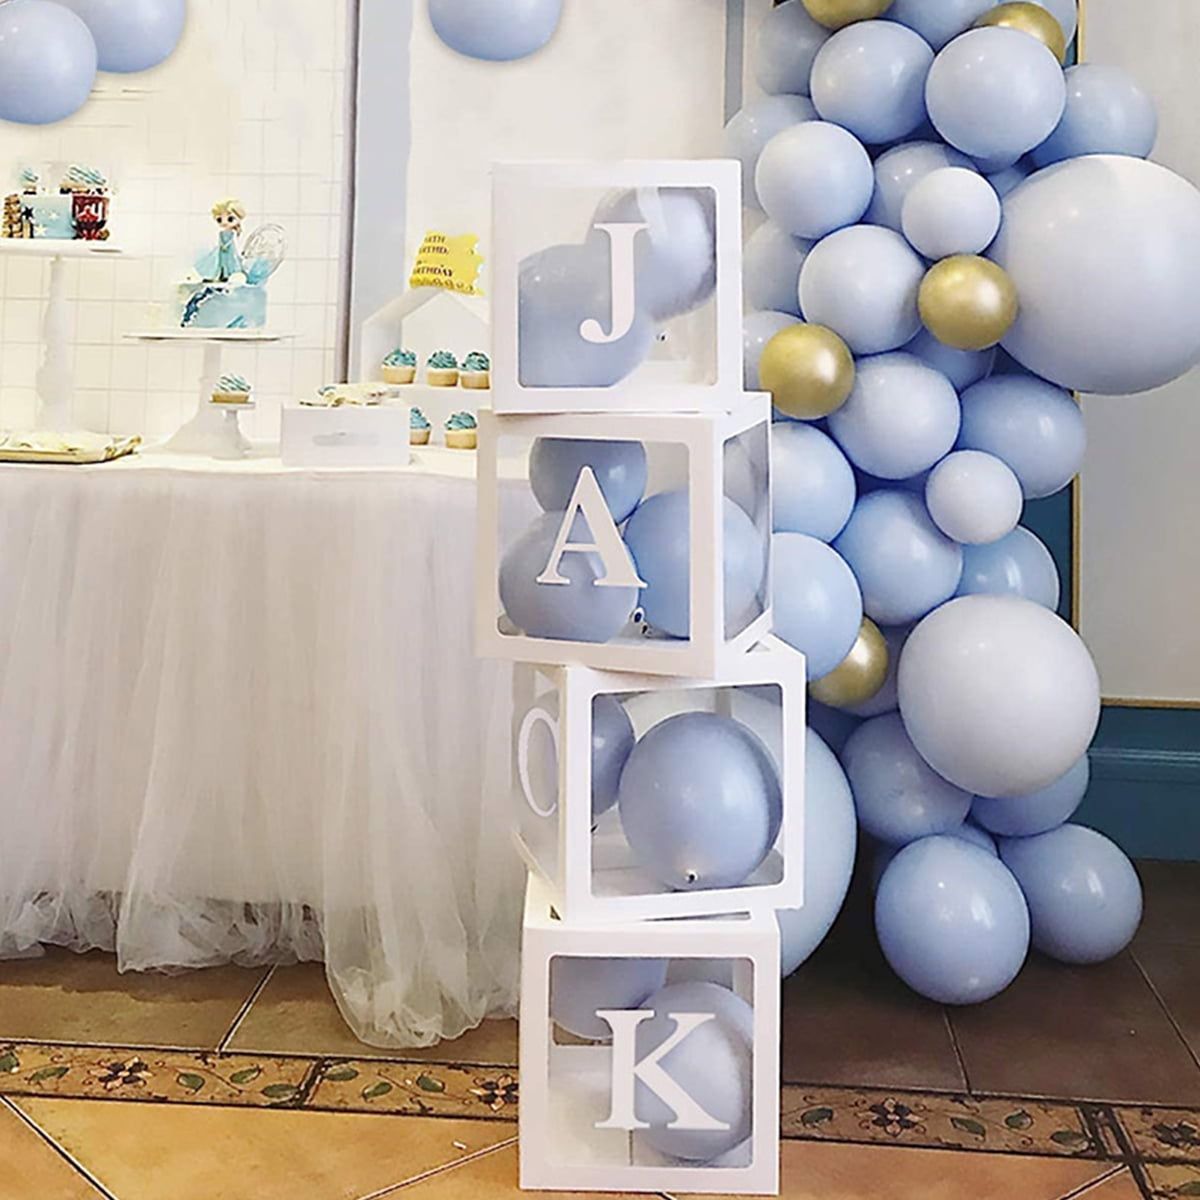 Gender Reveal Backdrop & First Birthday Favors White 4Pcs 12 Baby Clear Balloon Boxes Blocks for Boy or Girl Baby Shower Decorations CheeseandU Baby Shower Blocks with Letters